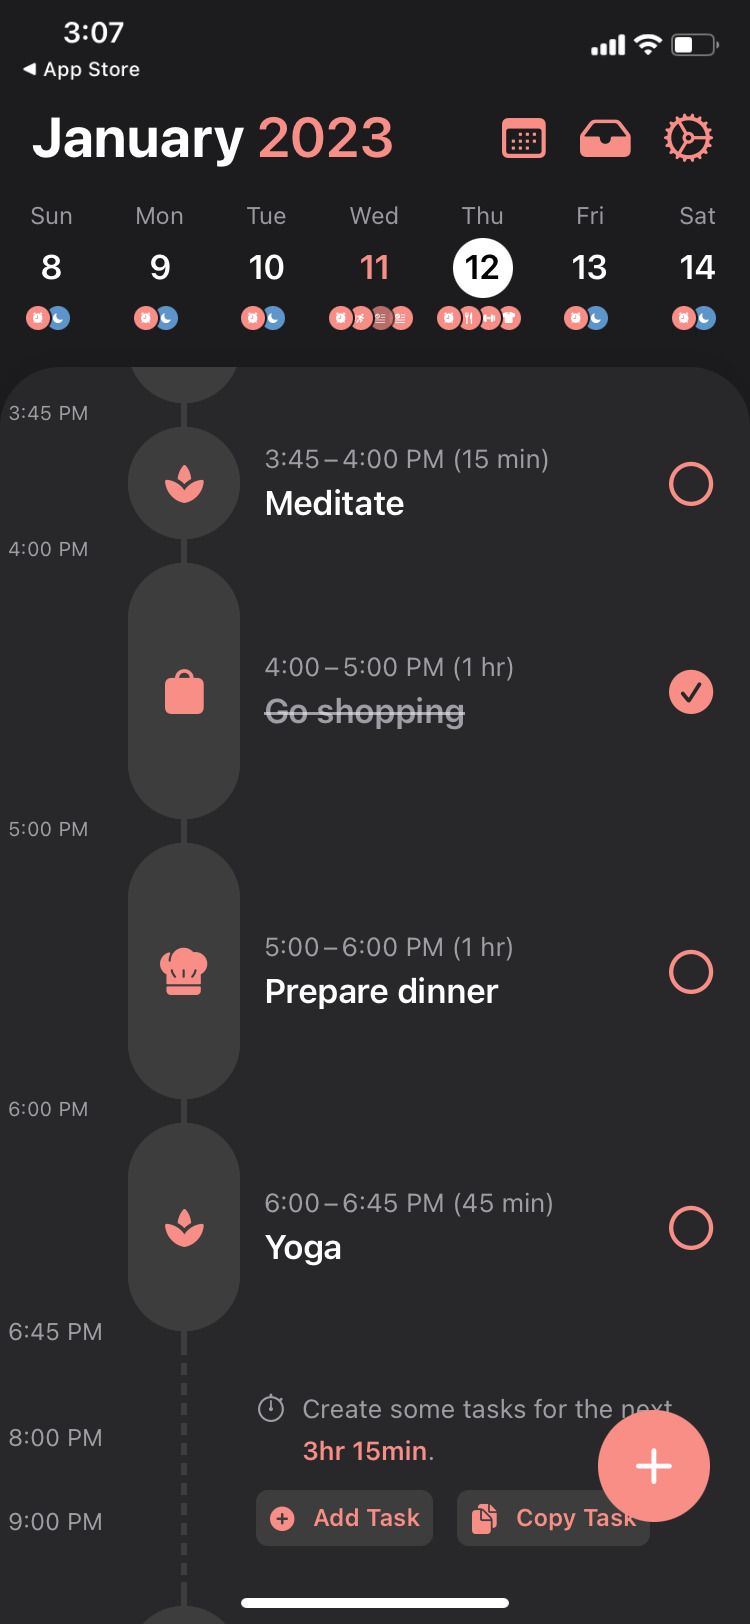 Structured - Daily Planner app meditate task